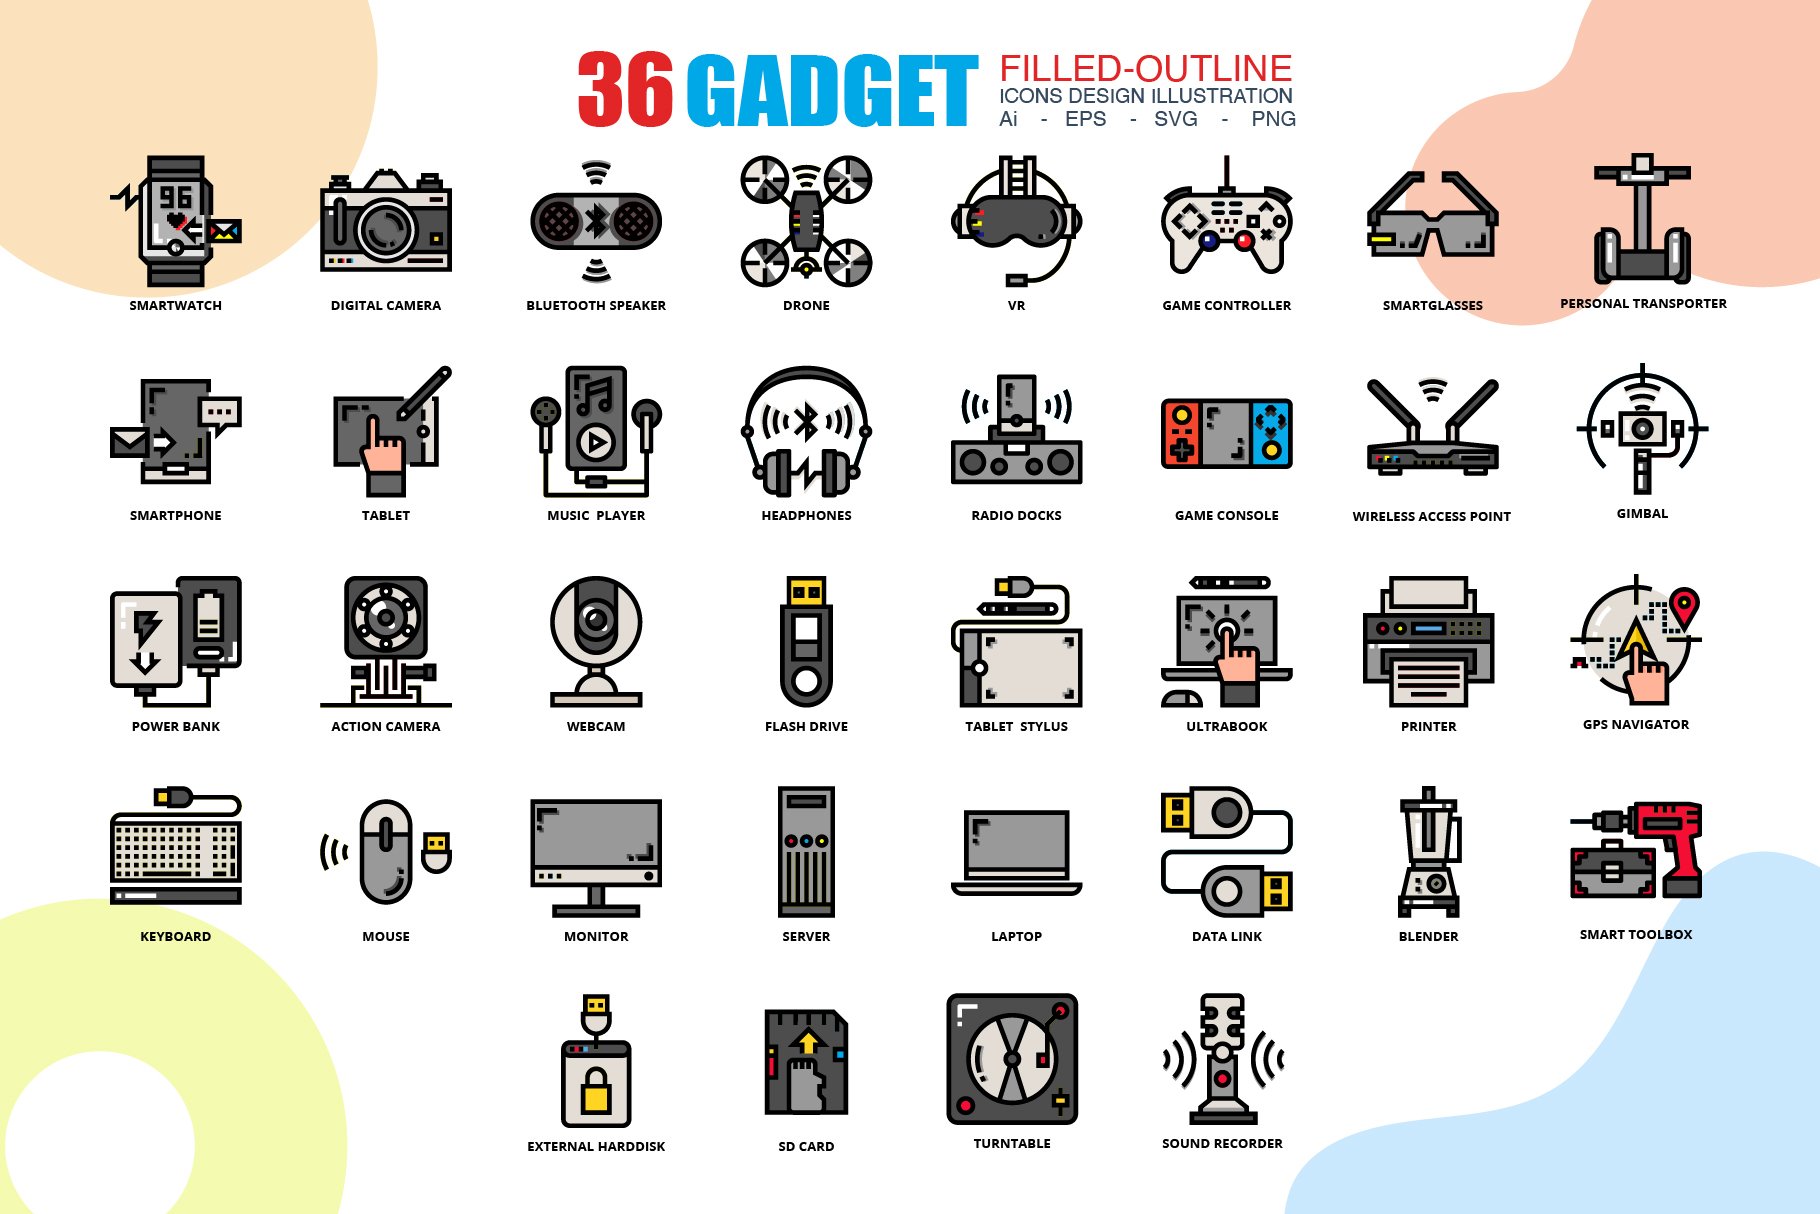 36 Gadget icons set x 3 Style cover image.